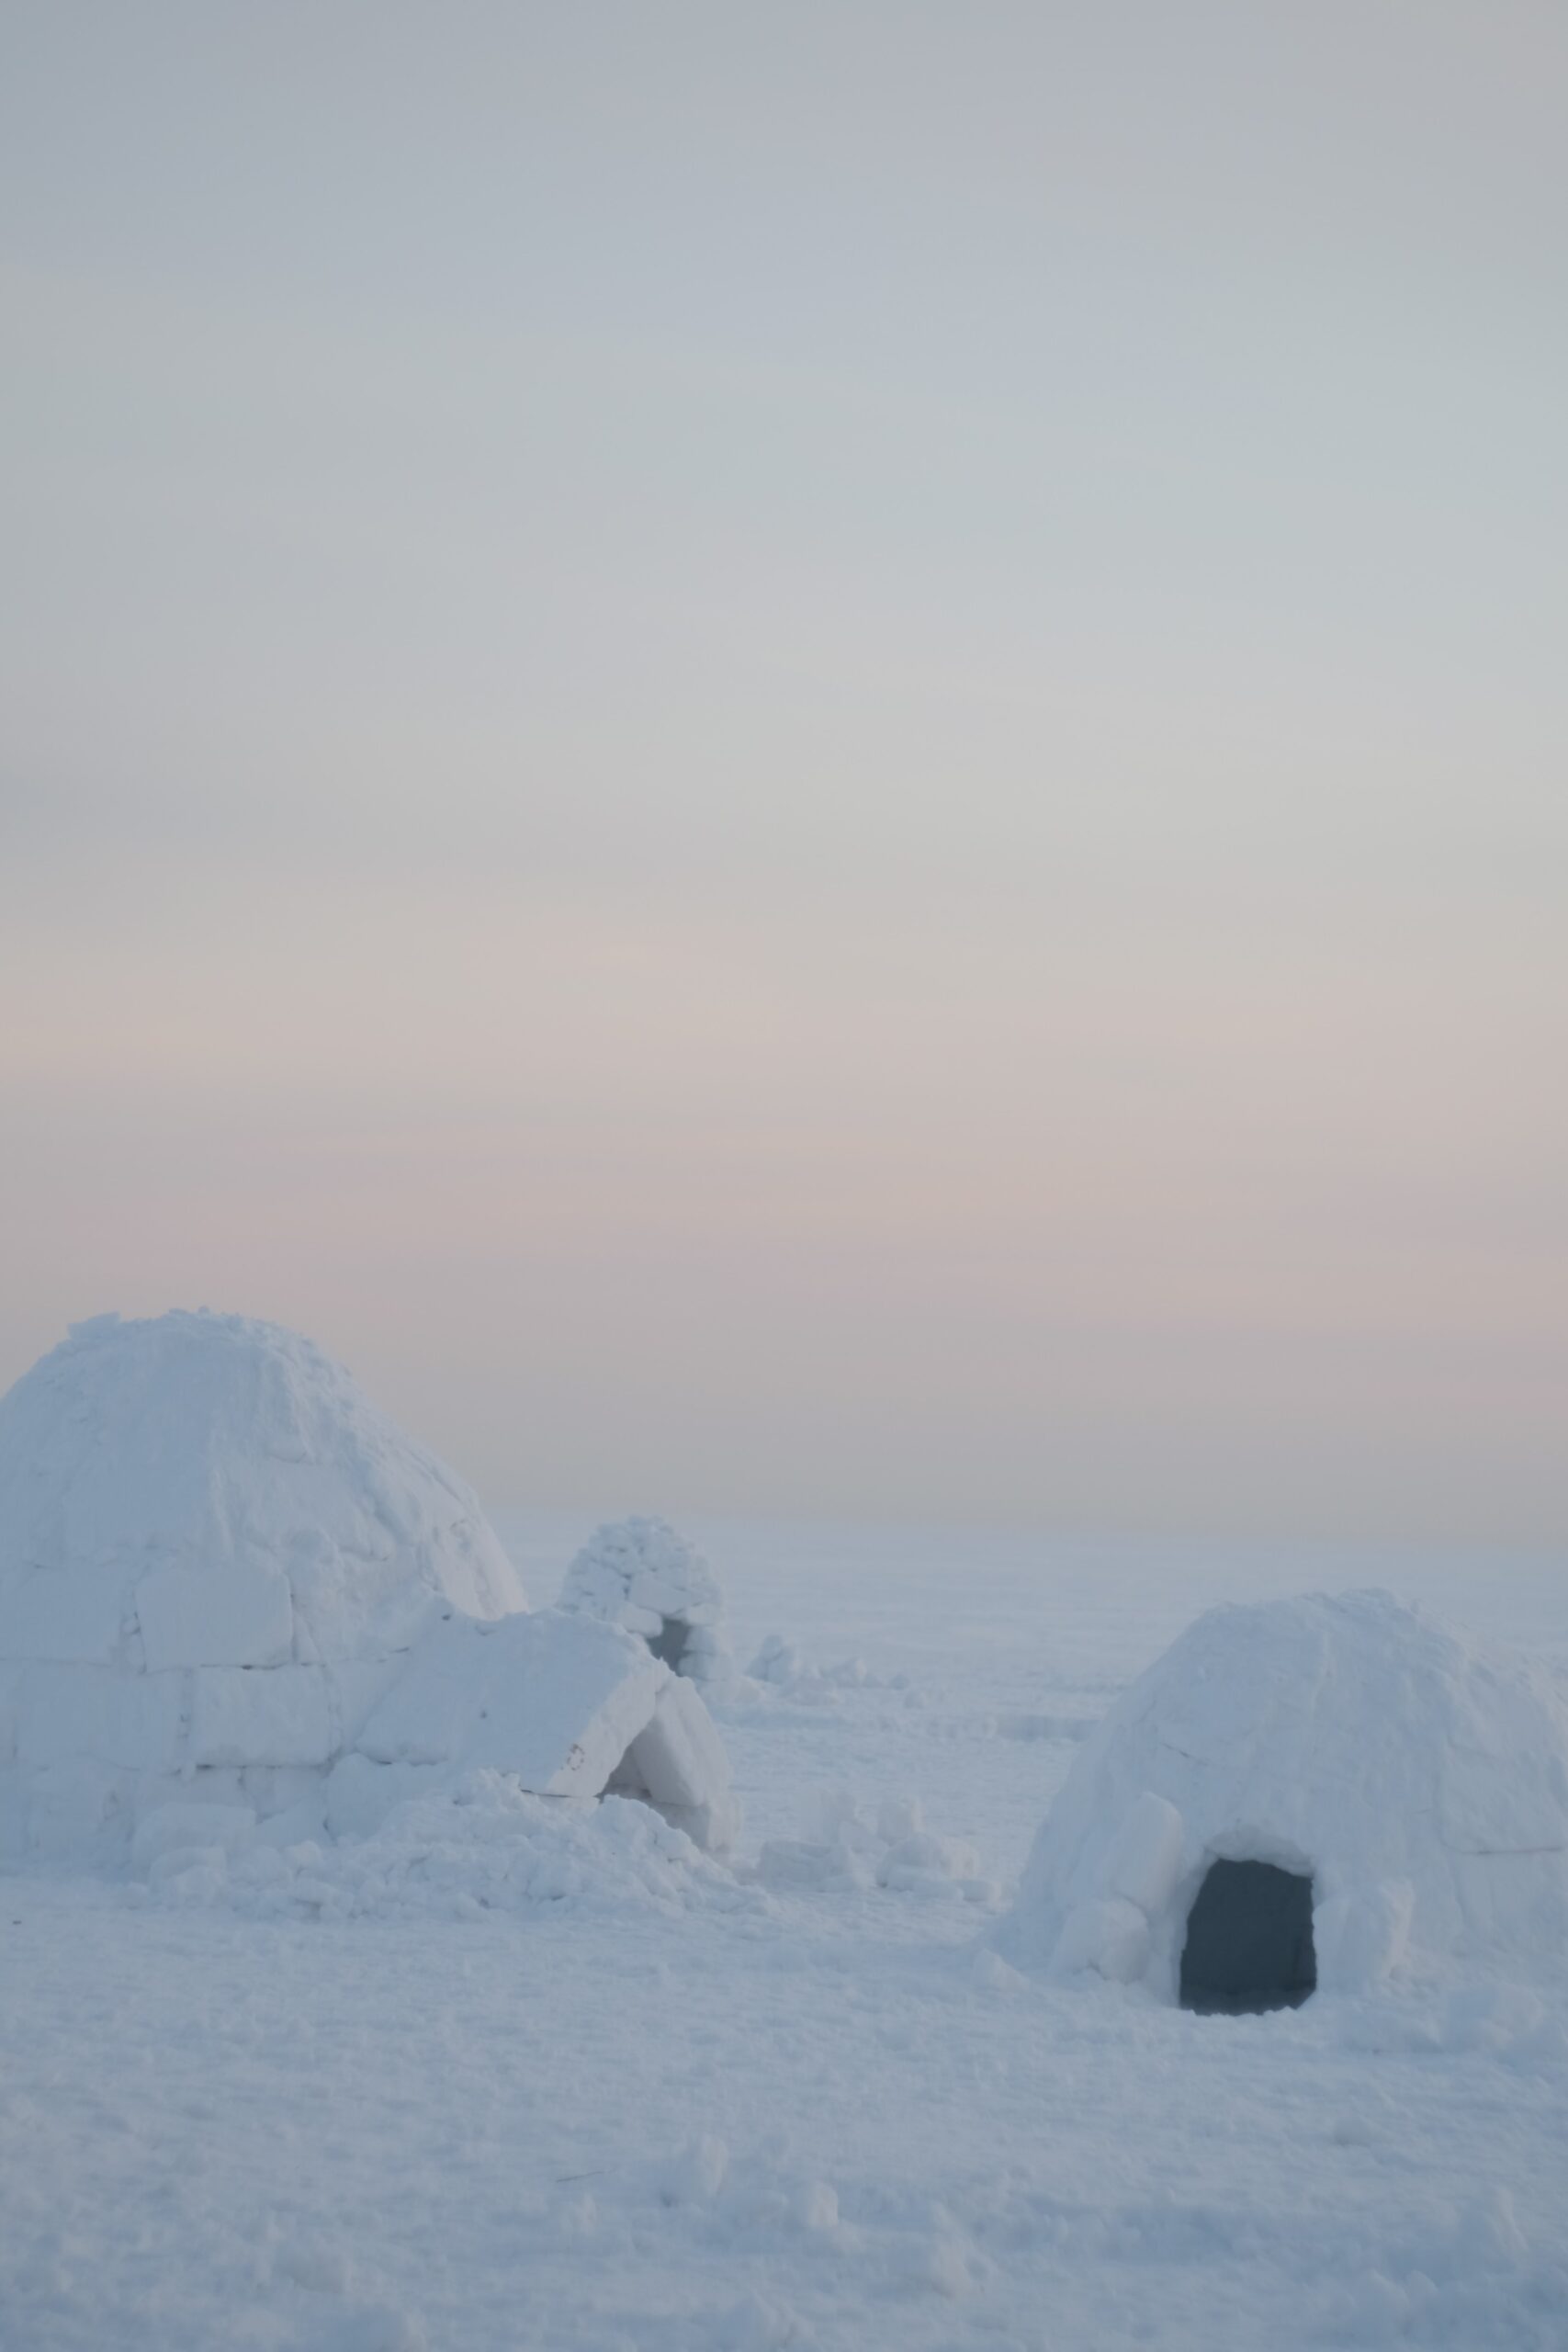 How Do You Build An Igloo For Cold Weather Survival?